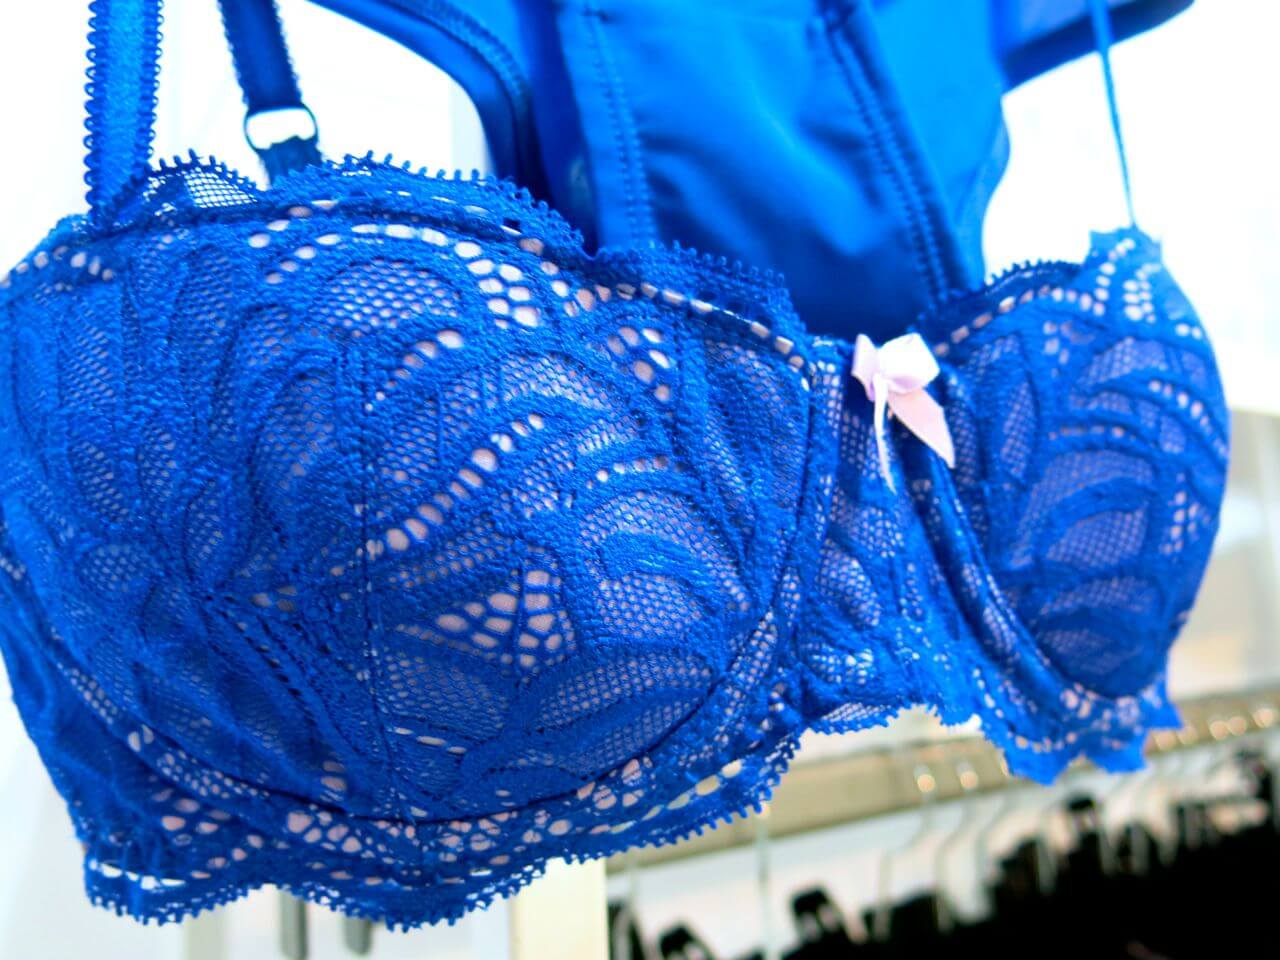 NYC Lingerie Market A/W 2014 - The 4 Biggest Color Trends for Next Season